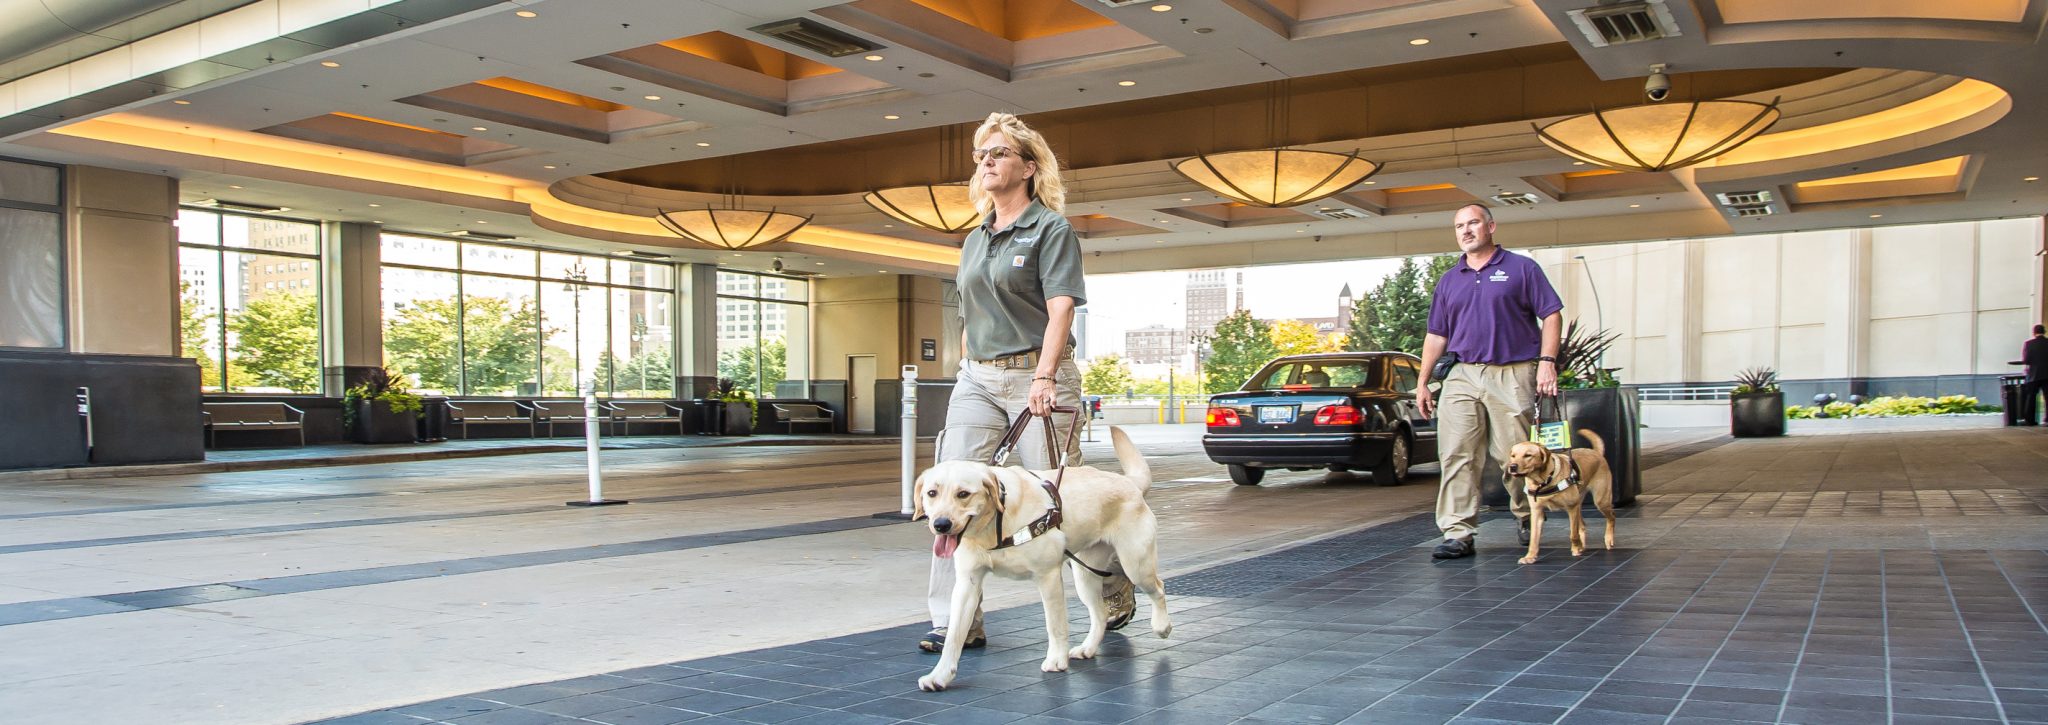 A woman walks with a guide dog in harness across a covered parking area in front of the MGM Grand Detroit. Behind her, a man walks with another dog in harness